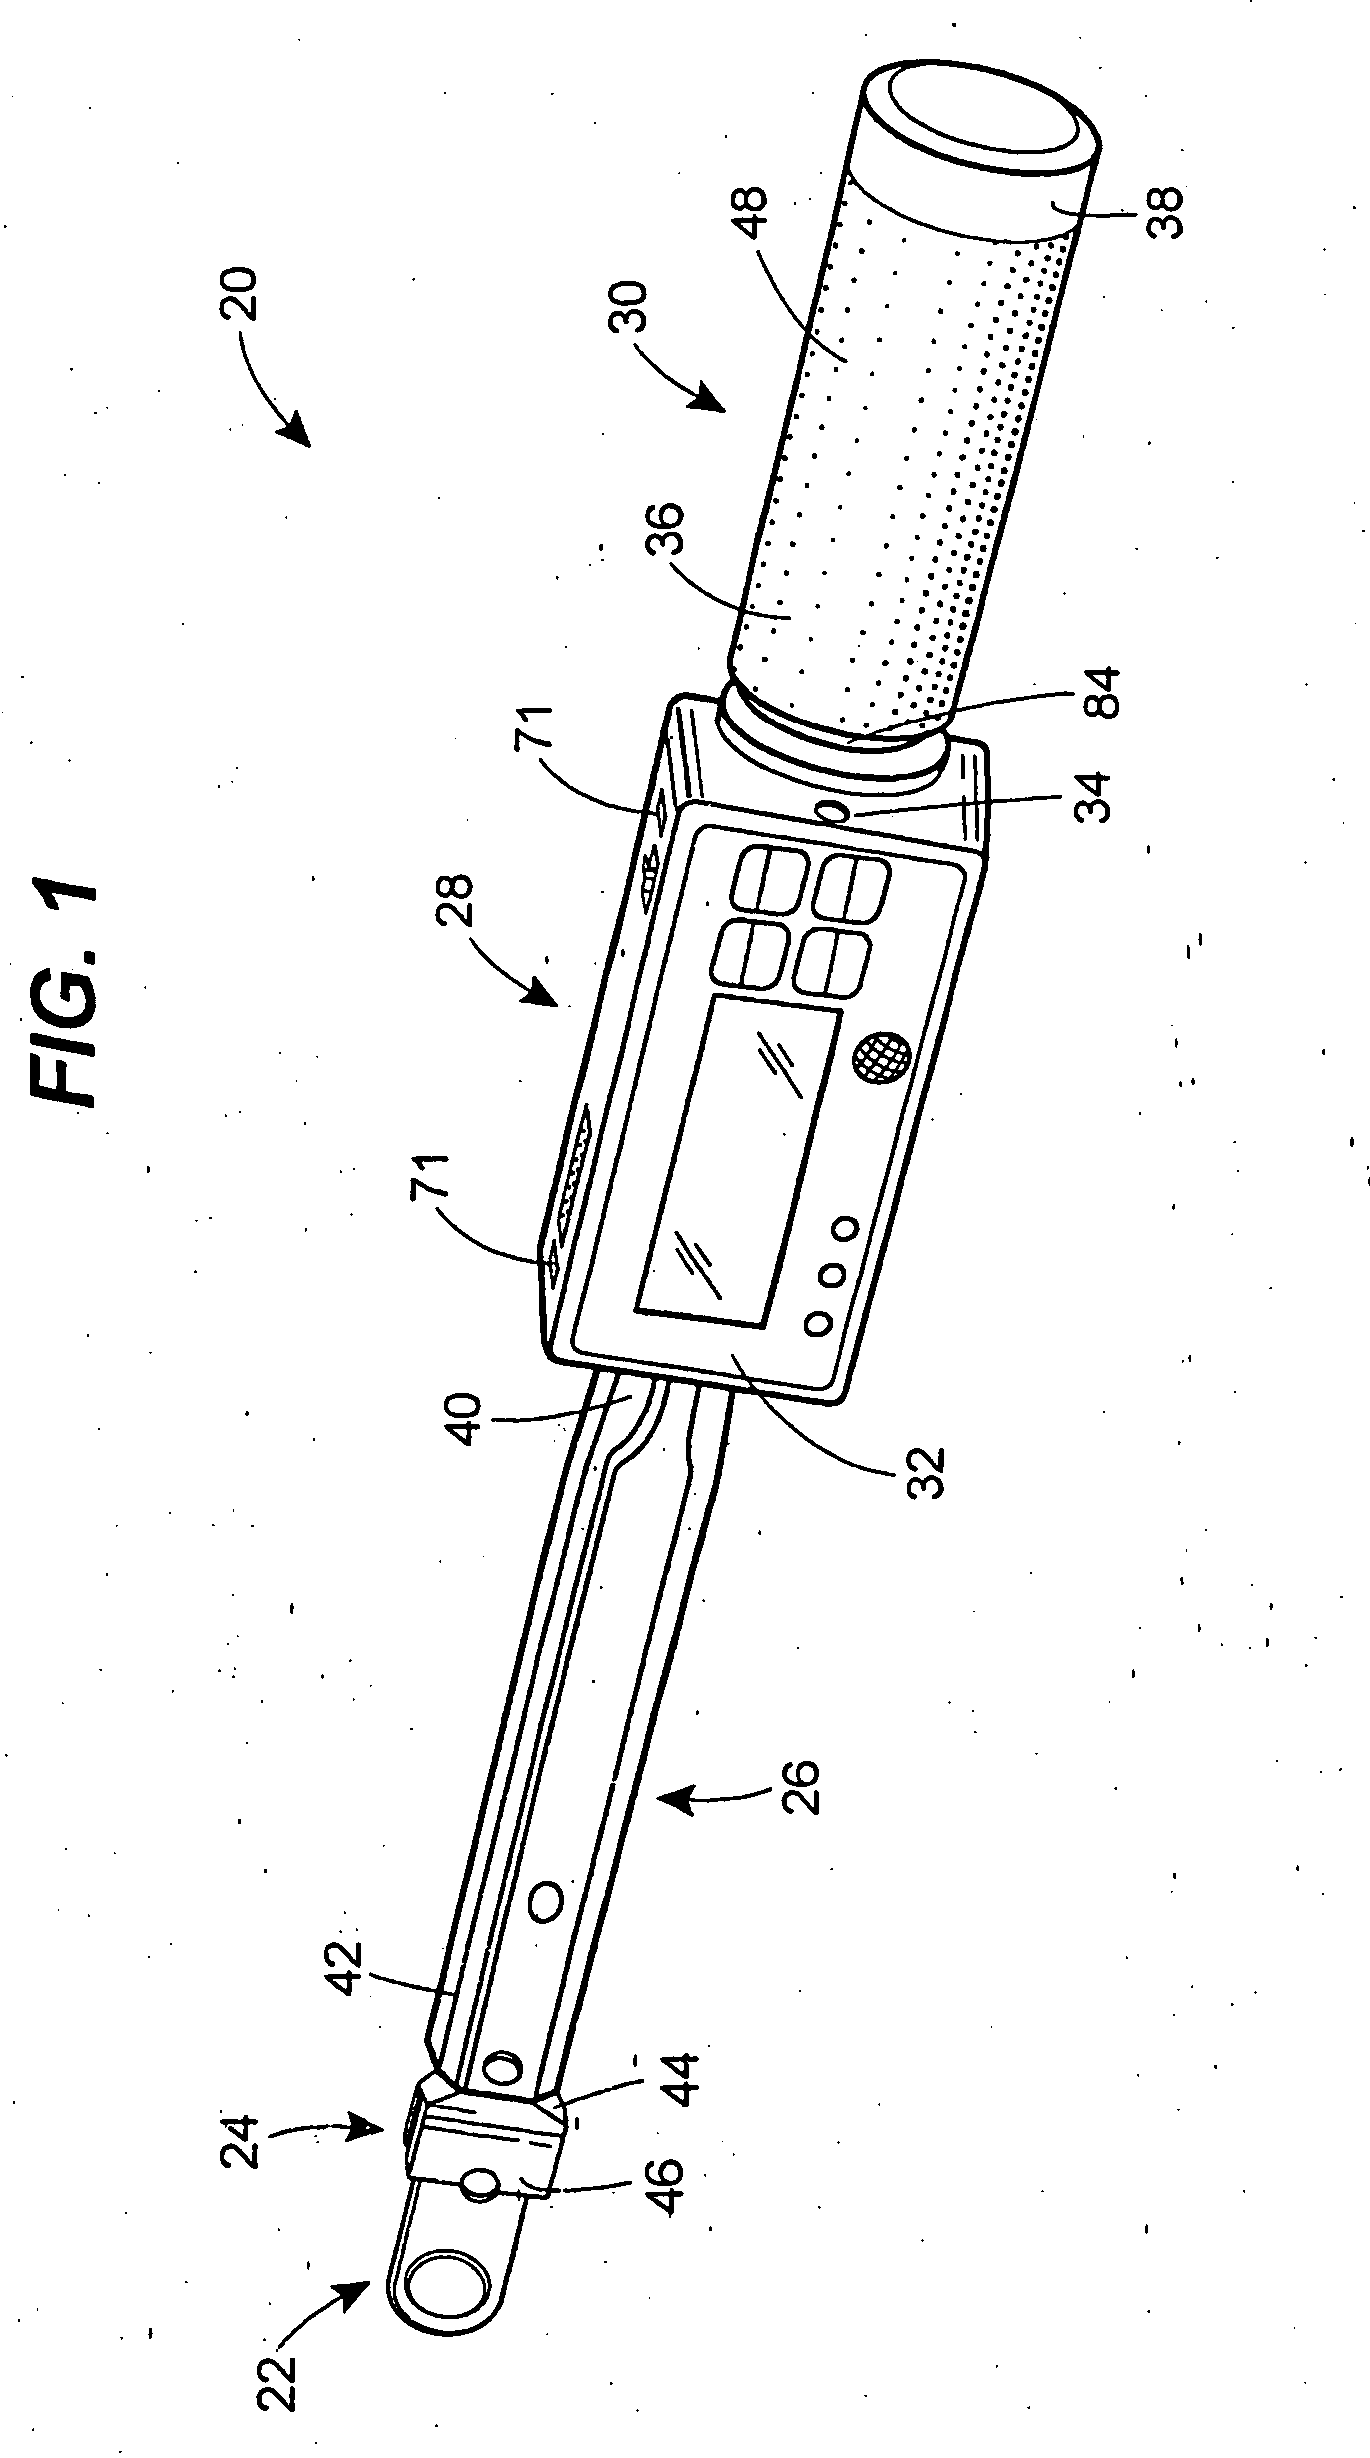 Torque wrench with fastener indicator and system and method employing same